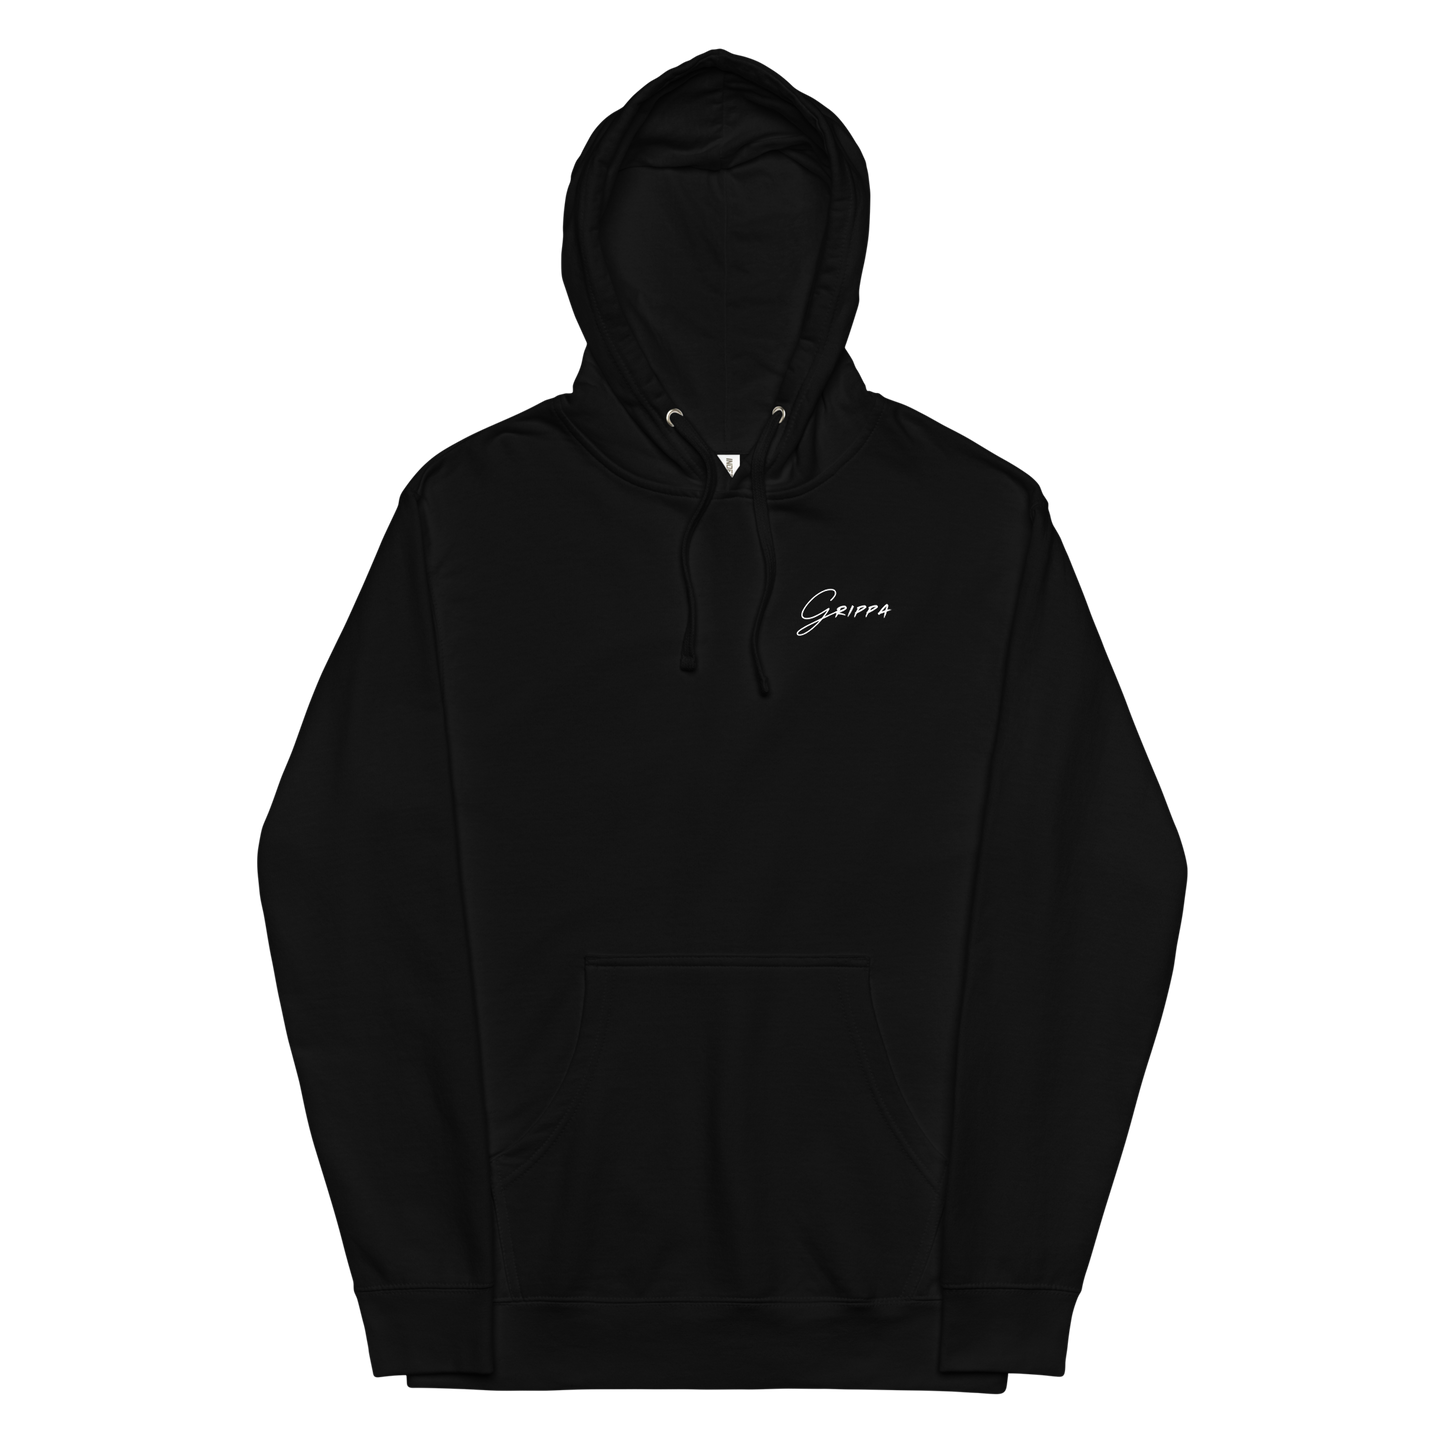 LUST FOR LIFE Hoodie